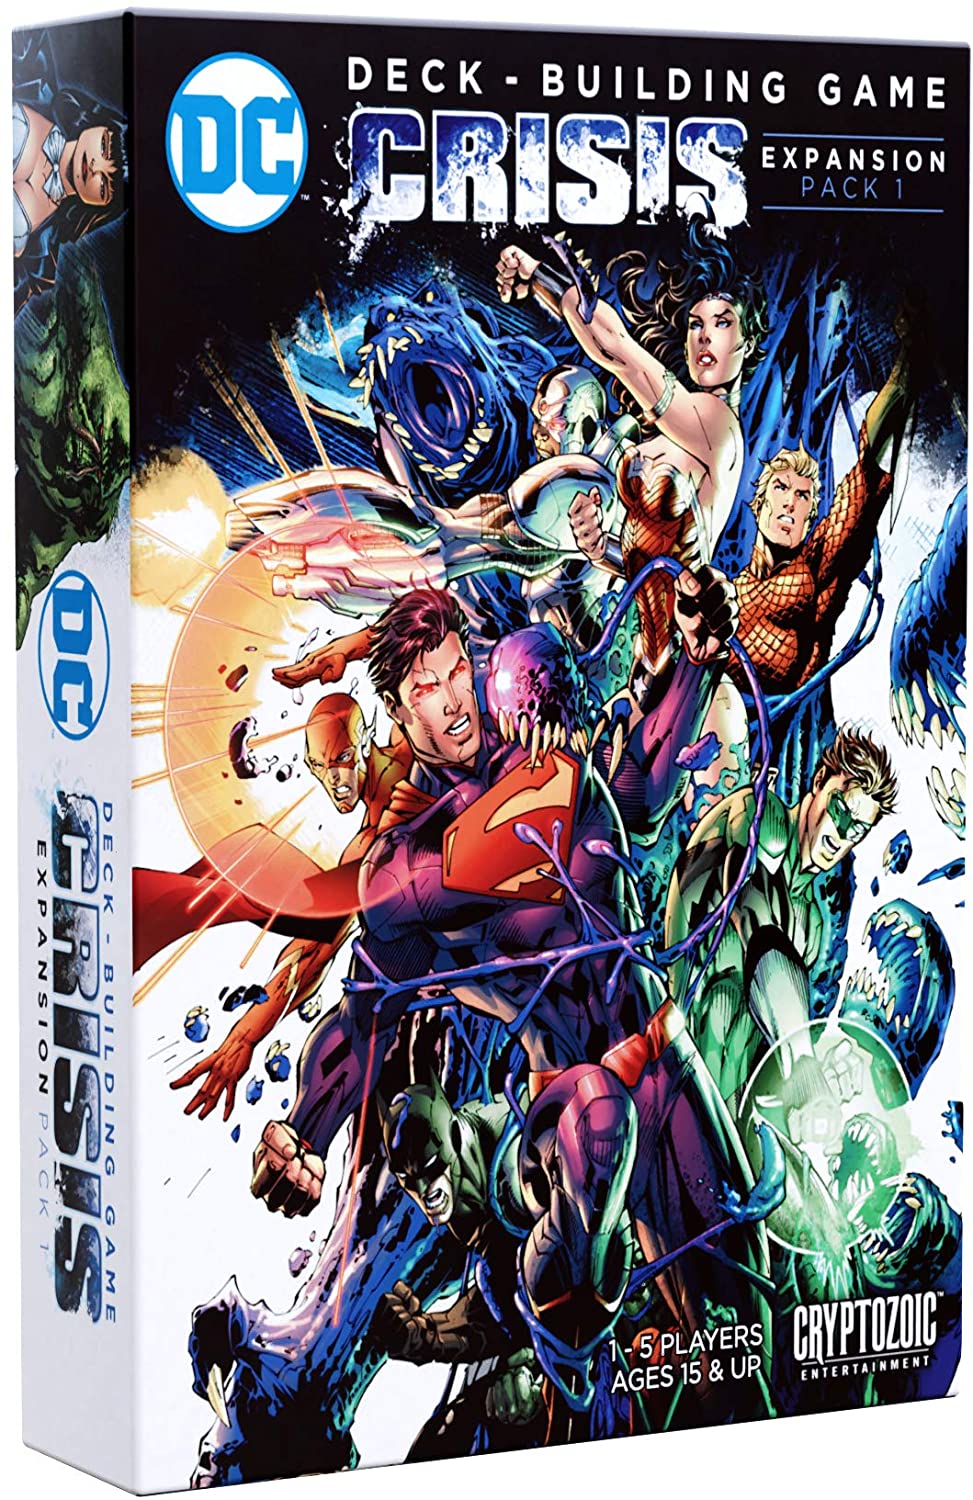 (BSG Certified USED) DC Comics: Deck-Building Game - Crisis Expansion Pack #1